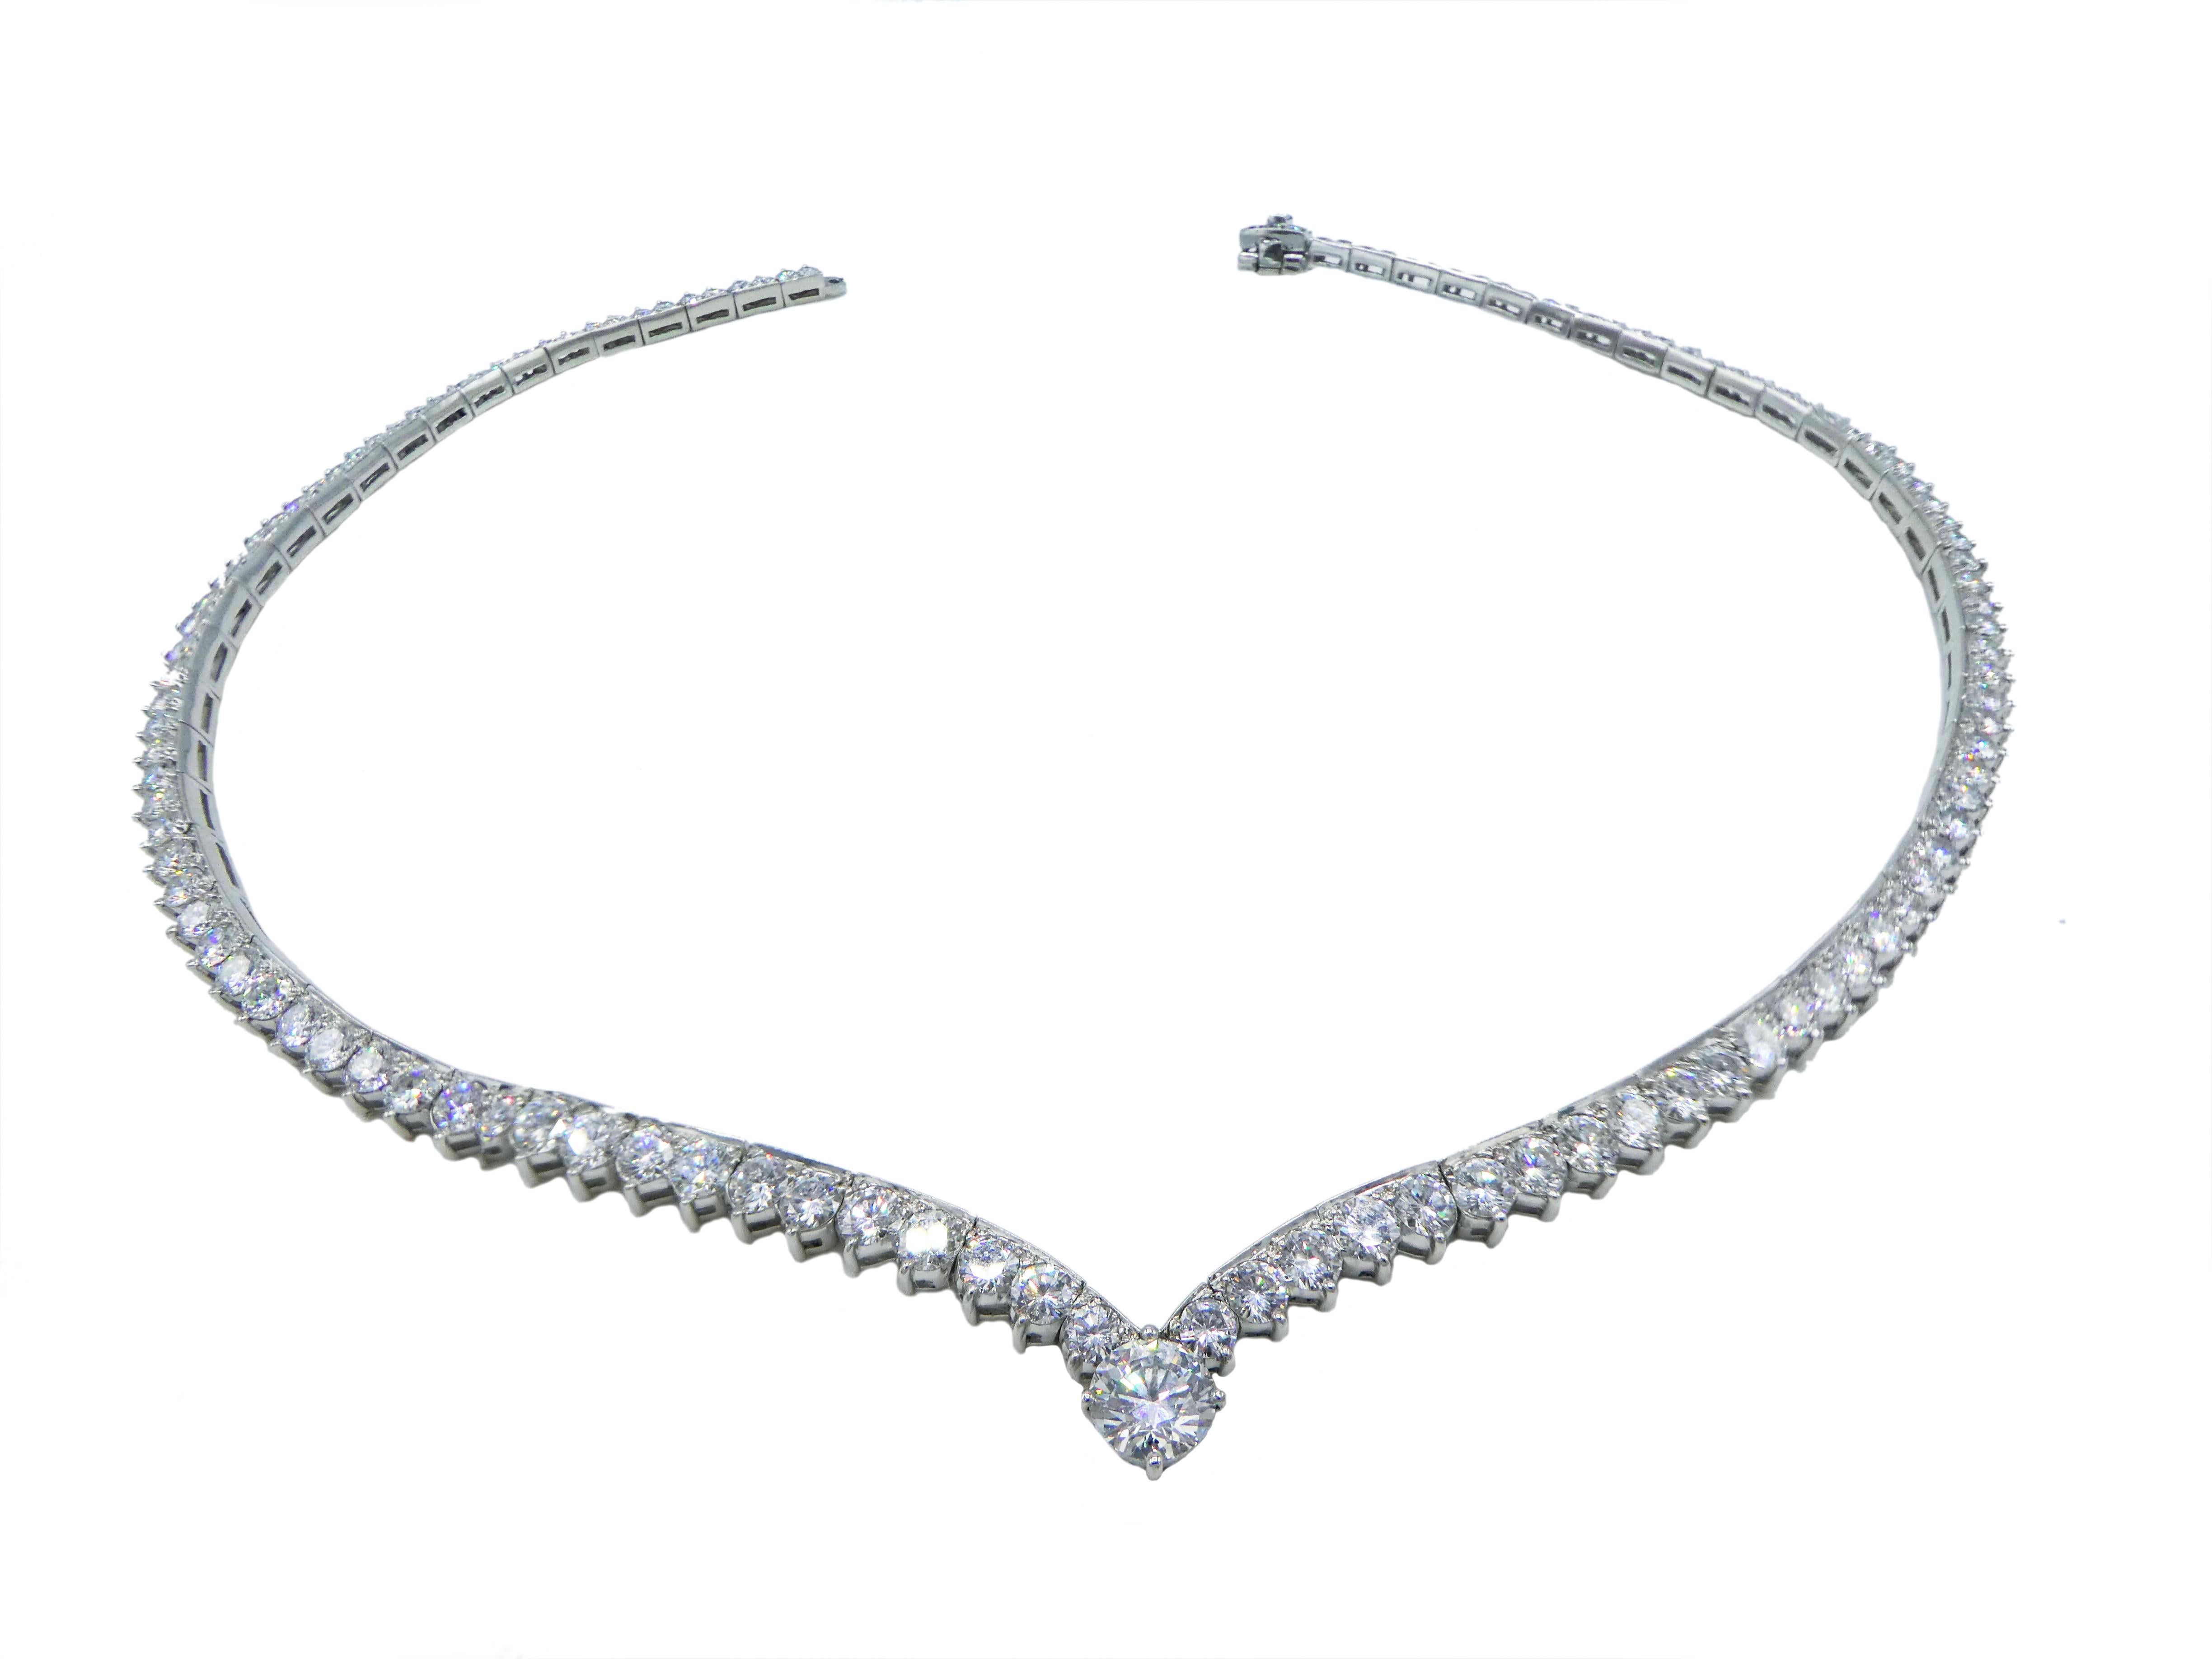 GIA Certified Platinum 15 Carat Graduated Riviera Diamond Necklace. Center diamond is a GIA certified 1.10 carat H VS1 round brilliant cut diamond. 

GIA Report Number: 2145144200 (note original report pictured for details)
Metal: Platinum
Weight: